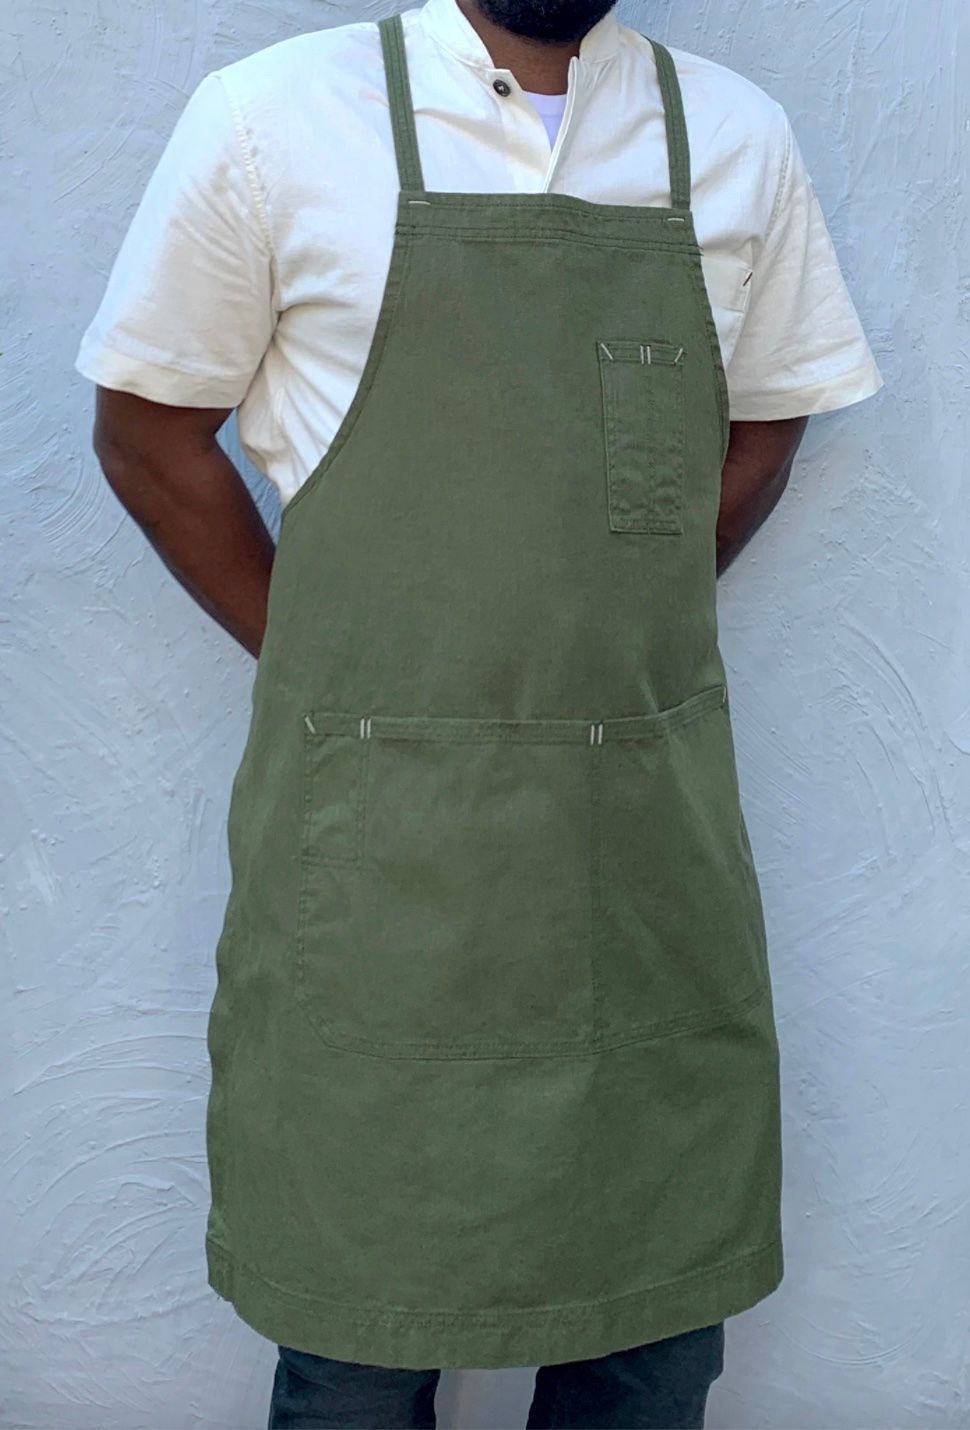 Perfashion Cool Mens Apron Chef Works with Adjustable Neck Straps 